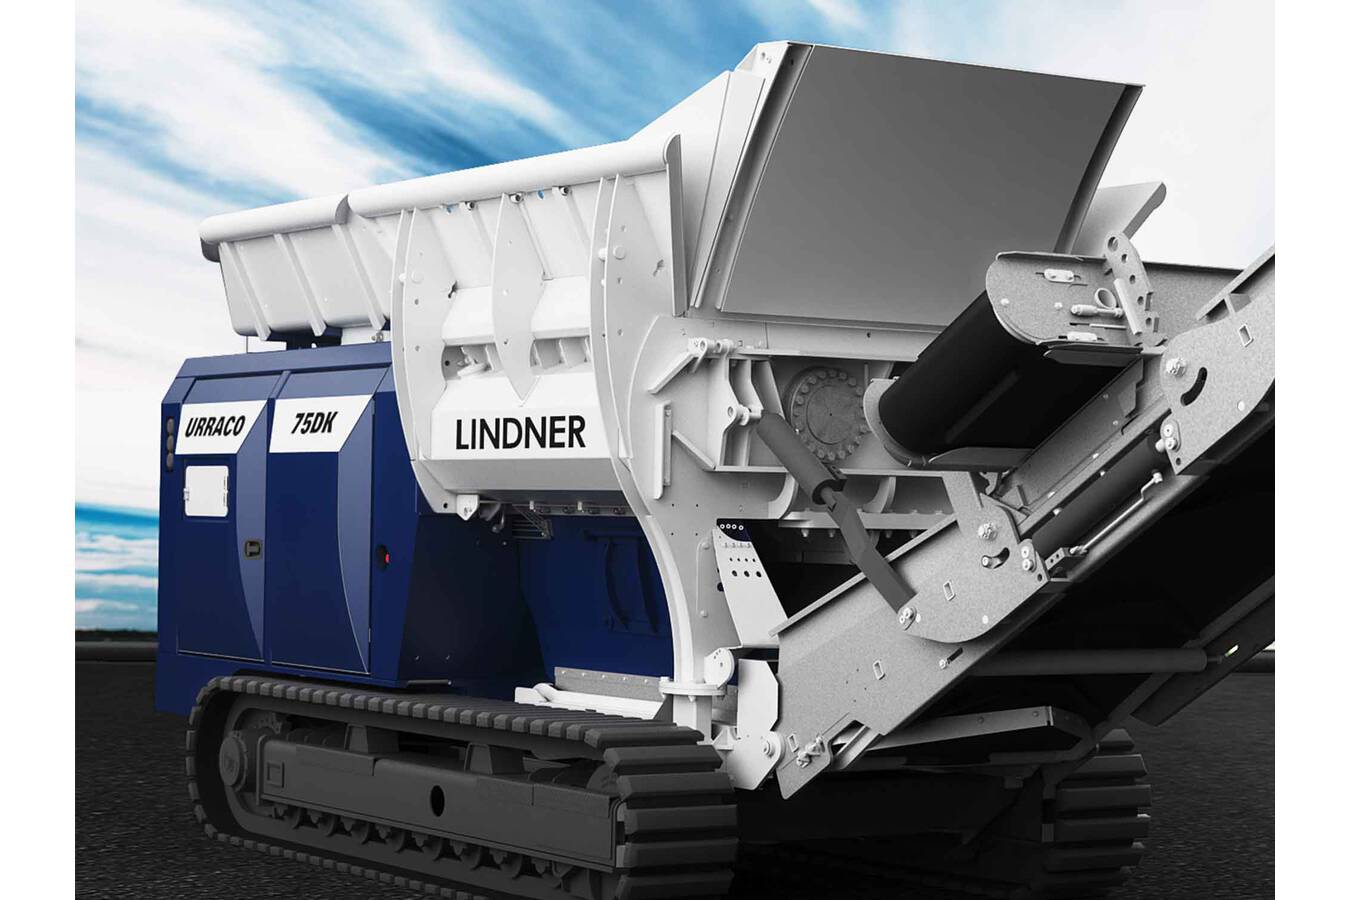 The quality and performance of the mobile shredder Urraco 75DK convinced Hitachi Zosen Inova, its joint venture partner, the BESIX Group, and the Dubai Municipality. (c) Lindner